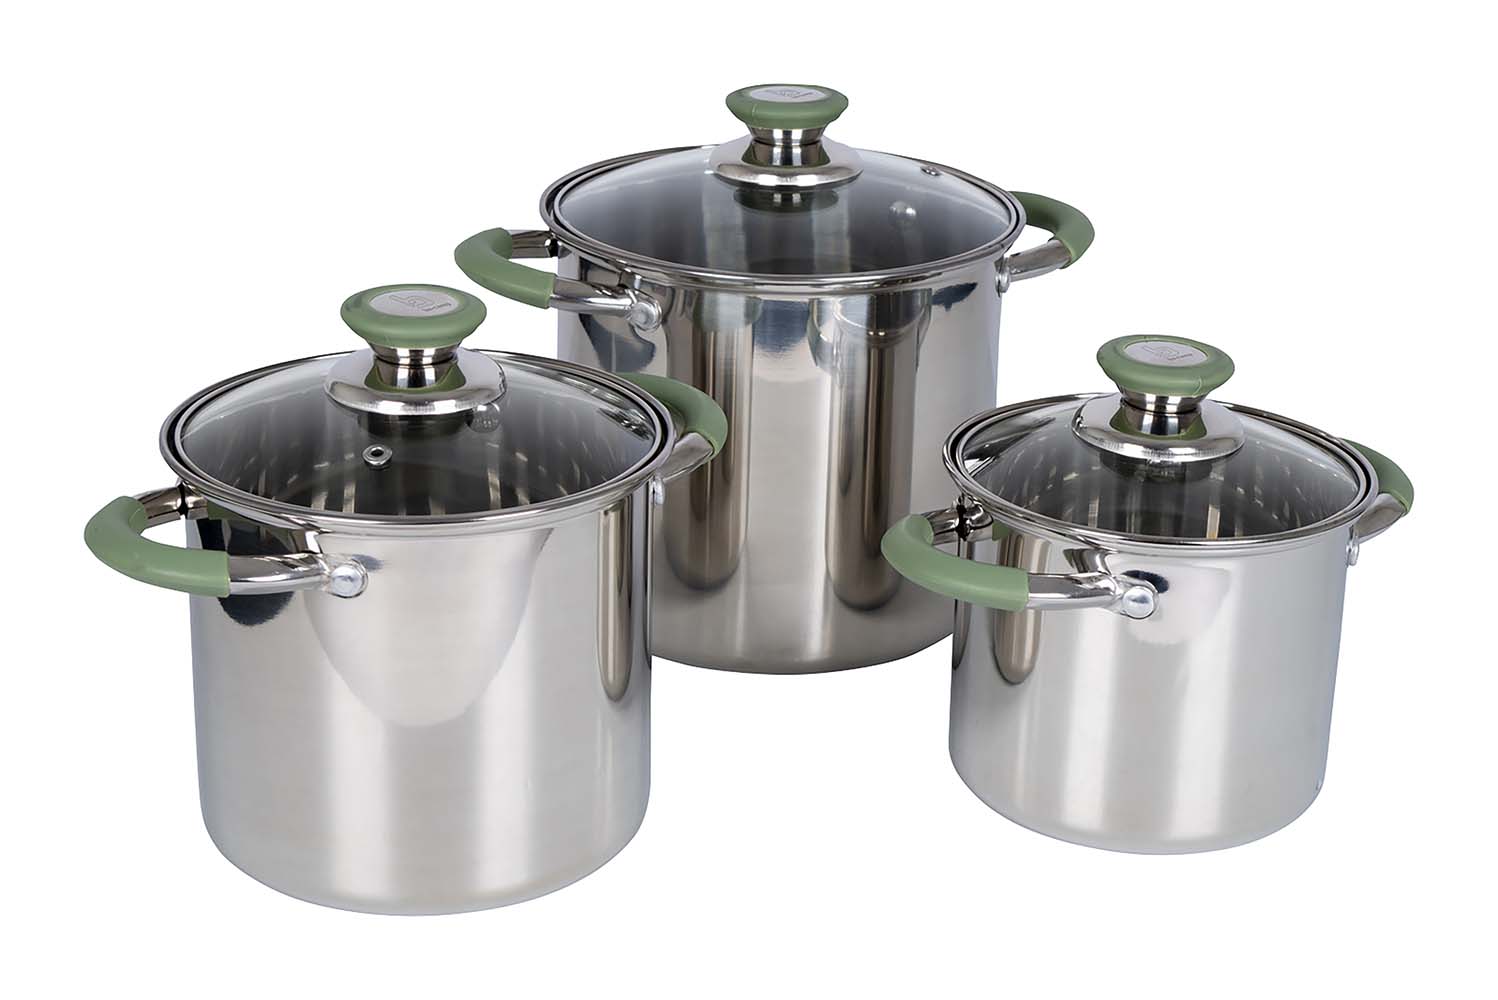 2100922 A robust 3-part stainless steel cookware set. These high cooking pans are equipped with sturdy and heat-resistant hand grips and a heat-resistant knob on the lid. These narrow and high pans are extremely suitable for the limited space on gas burners. Can be used on gas, ceramic and electrical heat sources. Dimensions (Øxh): 14x13, 16x15 and 18x17 cm. Contents: 2, 3 and 4.3 litres.